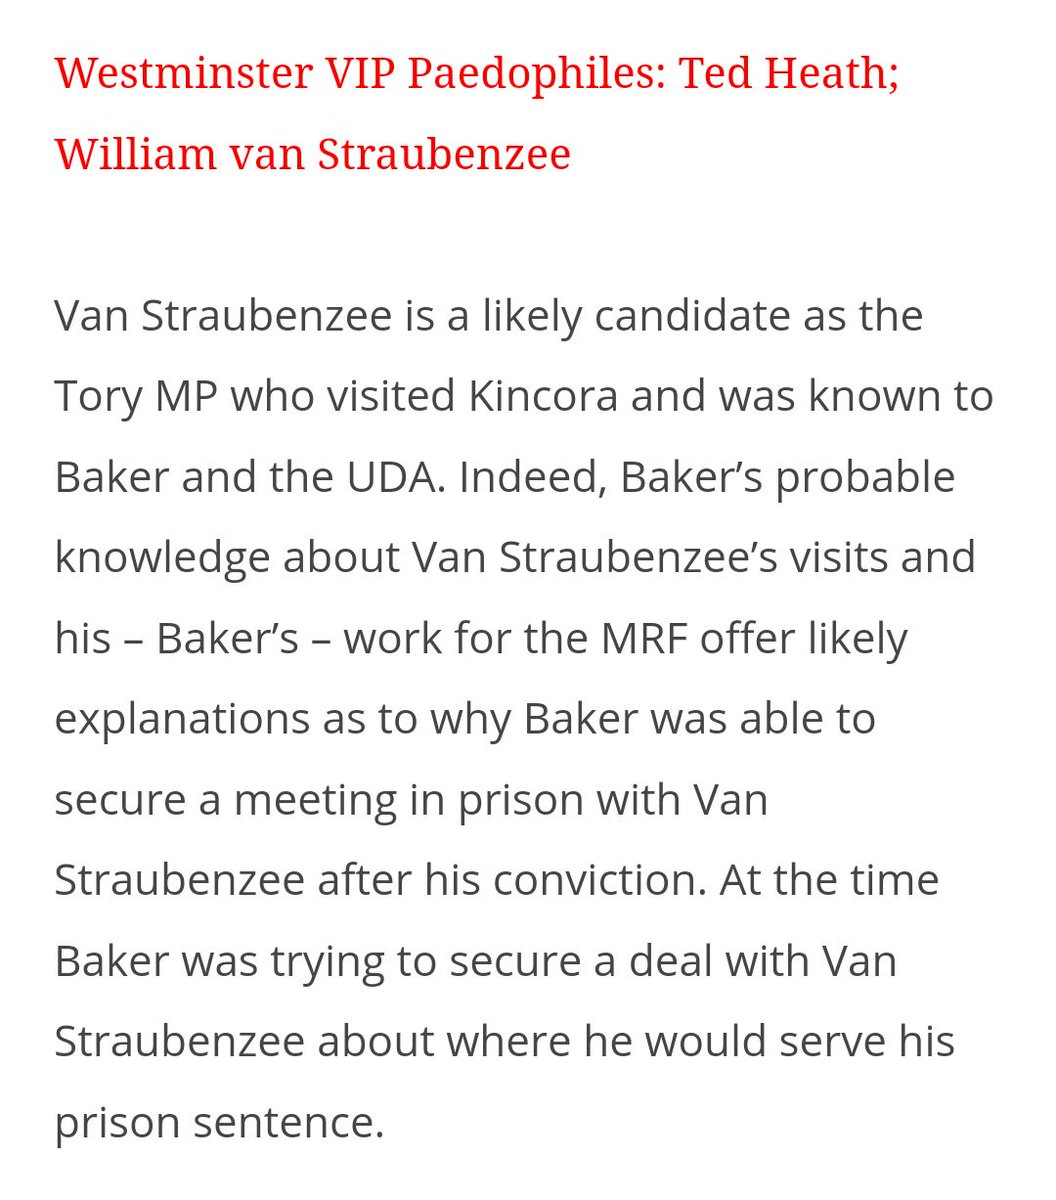 Former Richmond councillor, Thatcher-era MP, Little Willy Whitelaw's deputy at the Northern Ireland Office and member of the CoE General Synod, William van Straubenzee was named in child abuse files unearthed by the Cabinet Office in July 2015 linking him to Kincora.